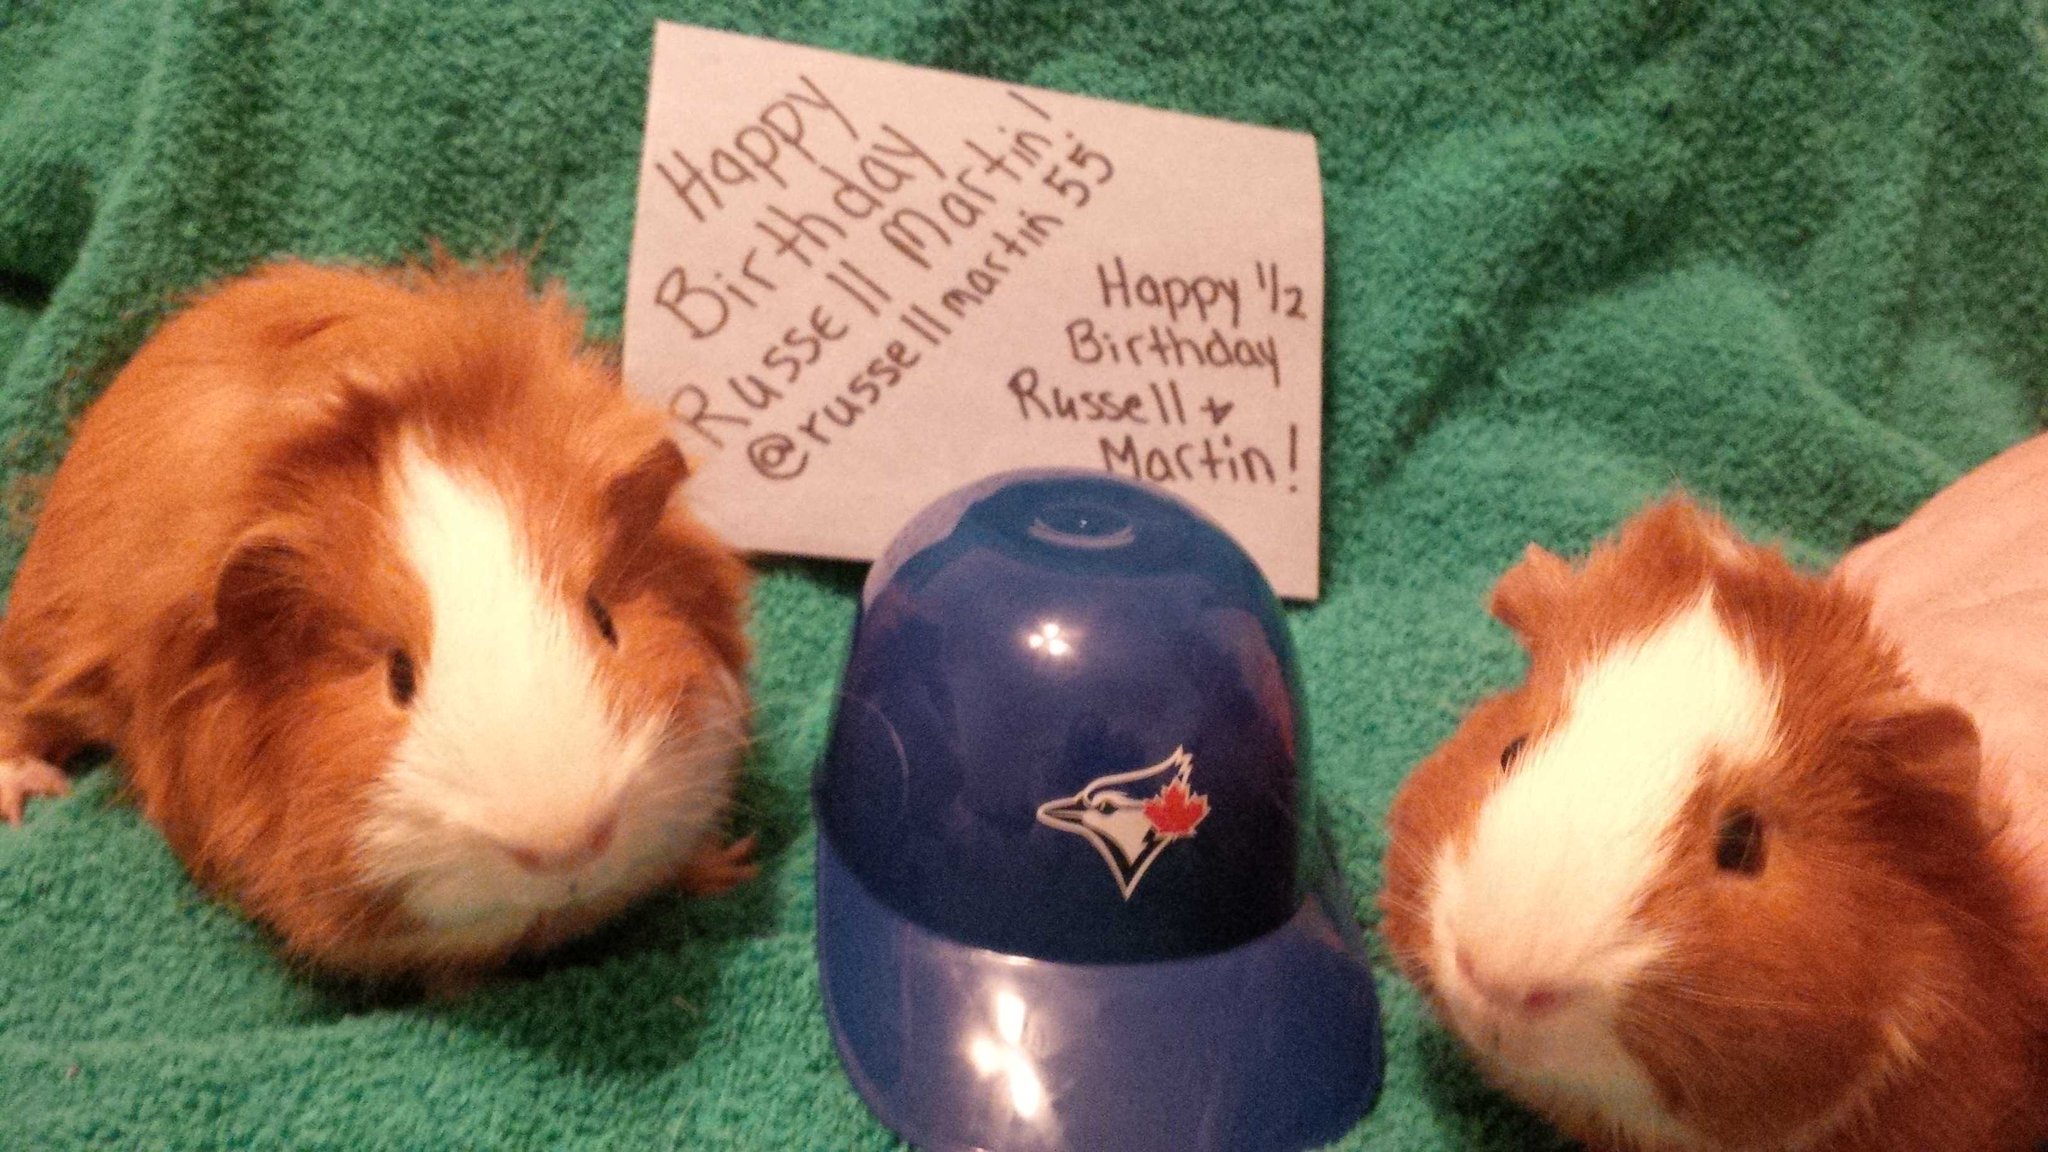 Happy 34th Birthday and a Happy 1/2 birthday to our piggies Russell & Martin!! 